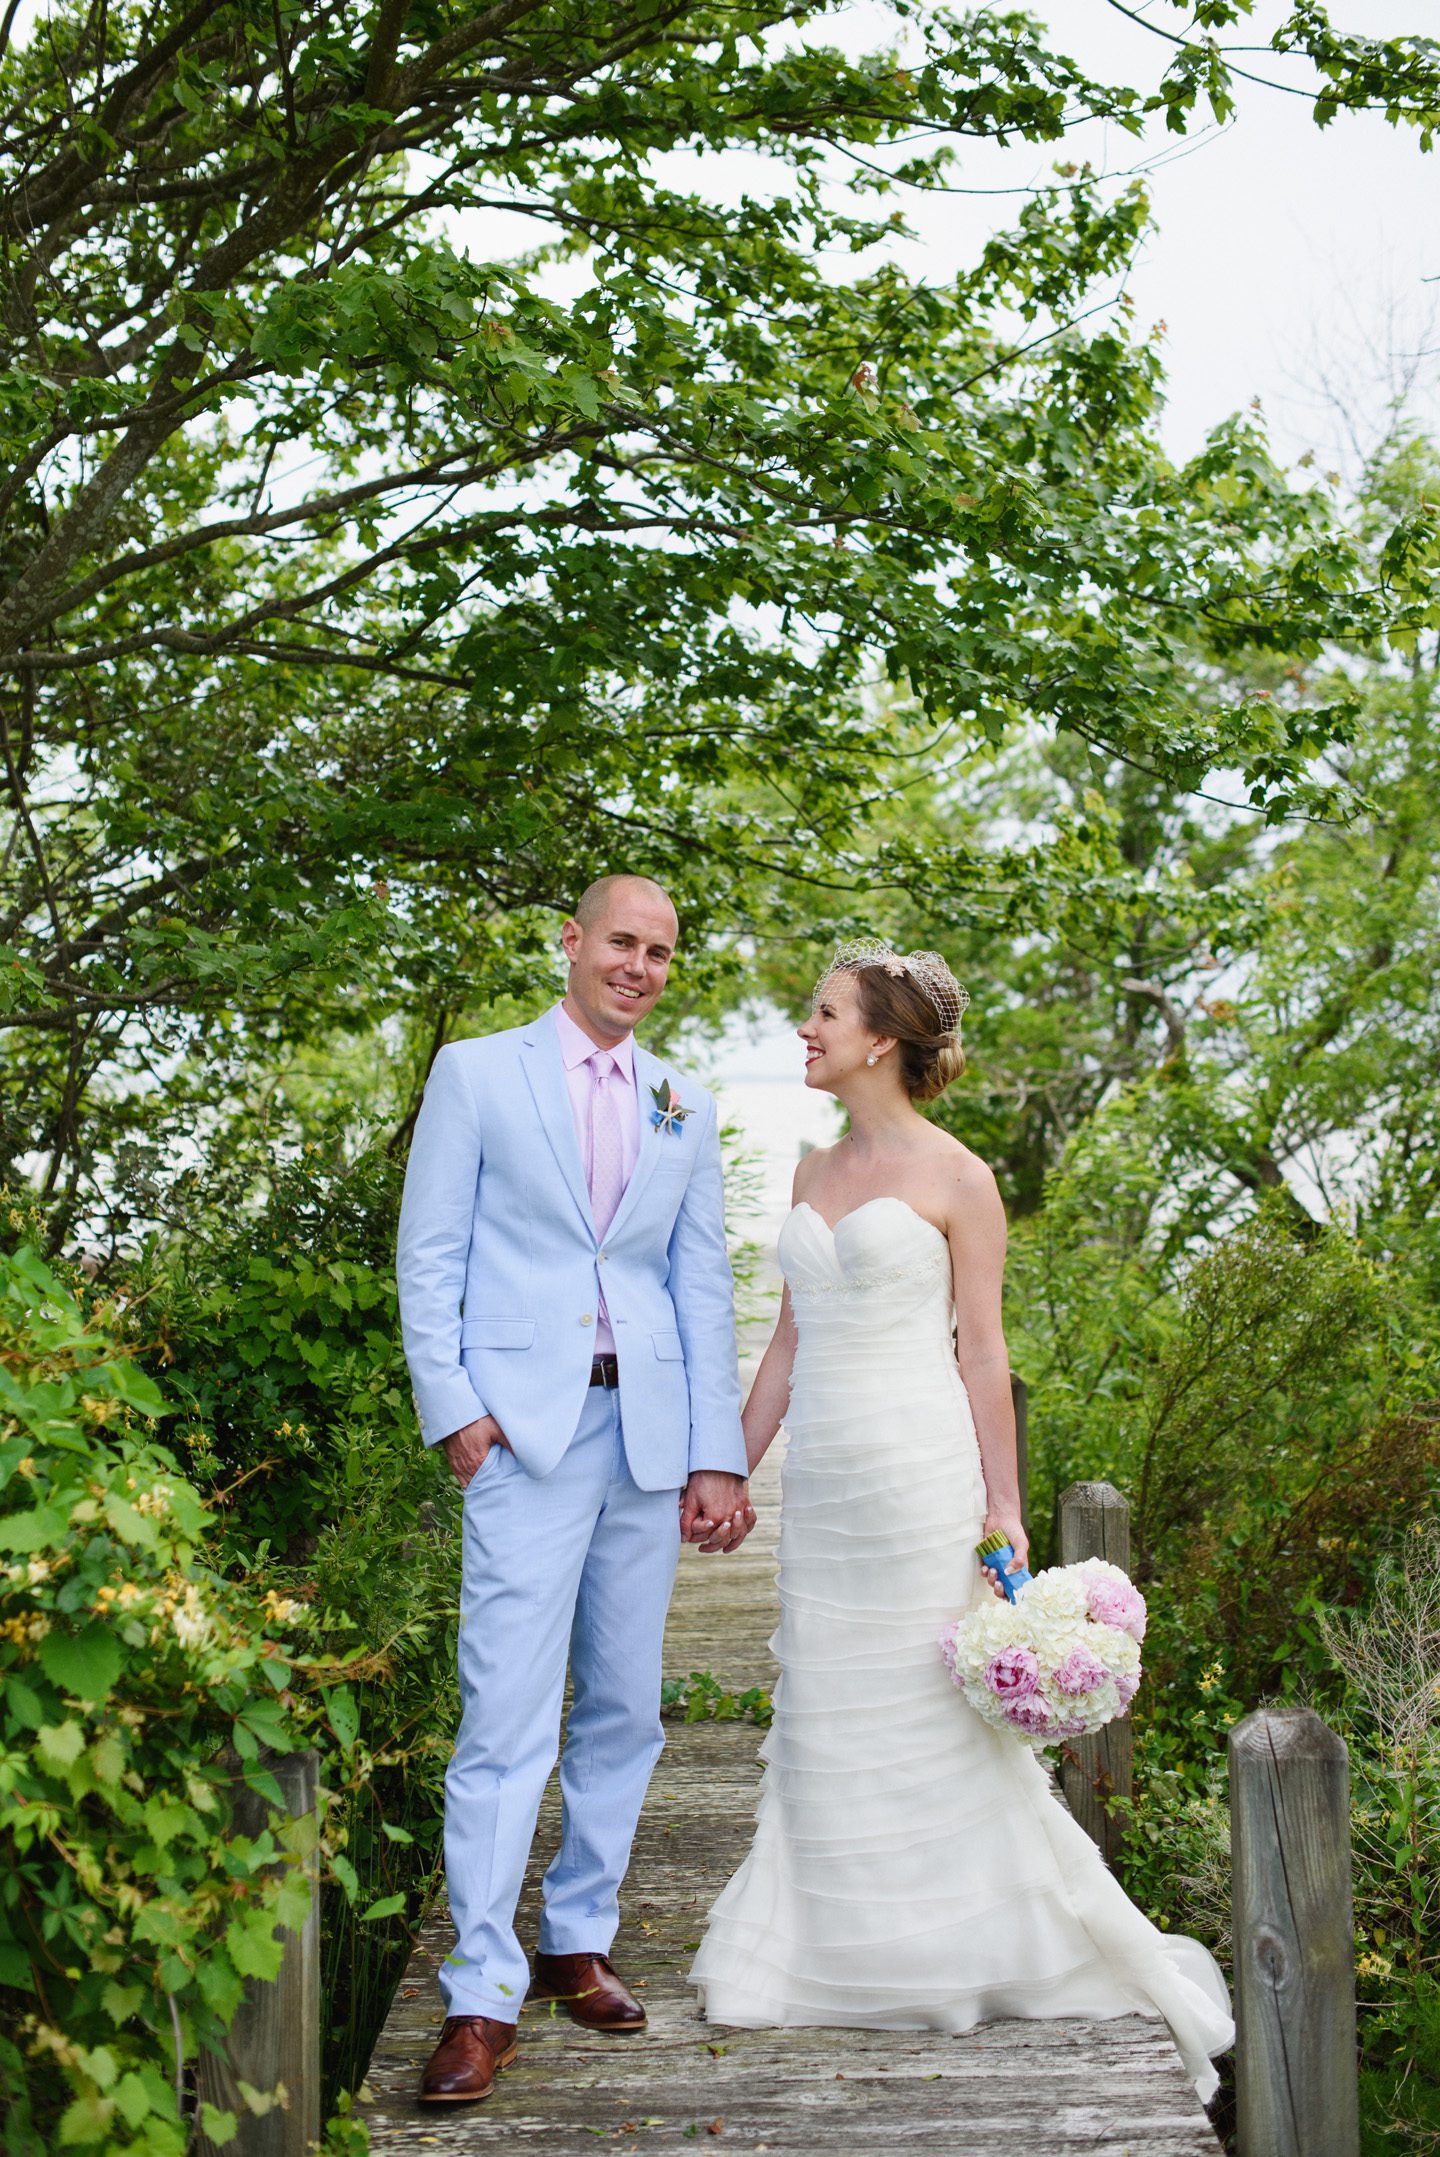 Outer Banks Wedding at the Grade Ritz Palm Photographers Neil GT Photography Wedding Portrait